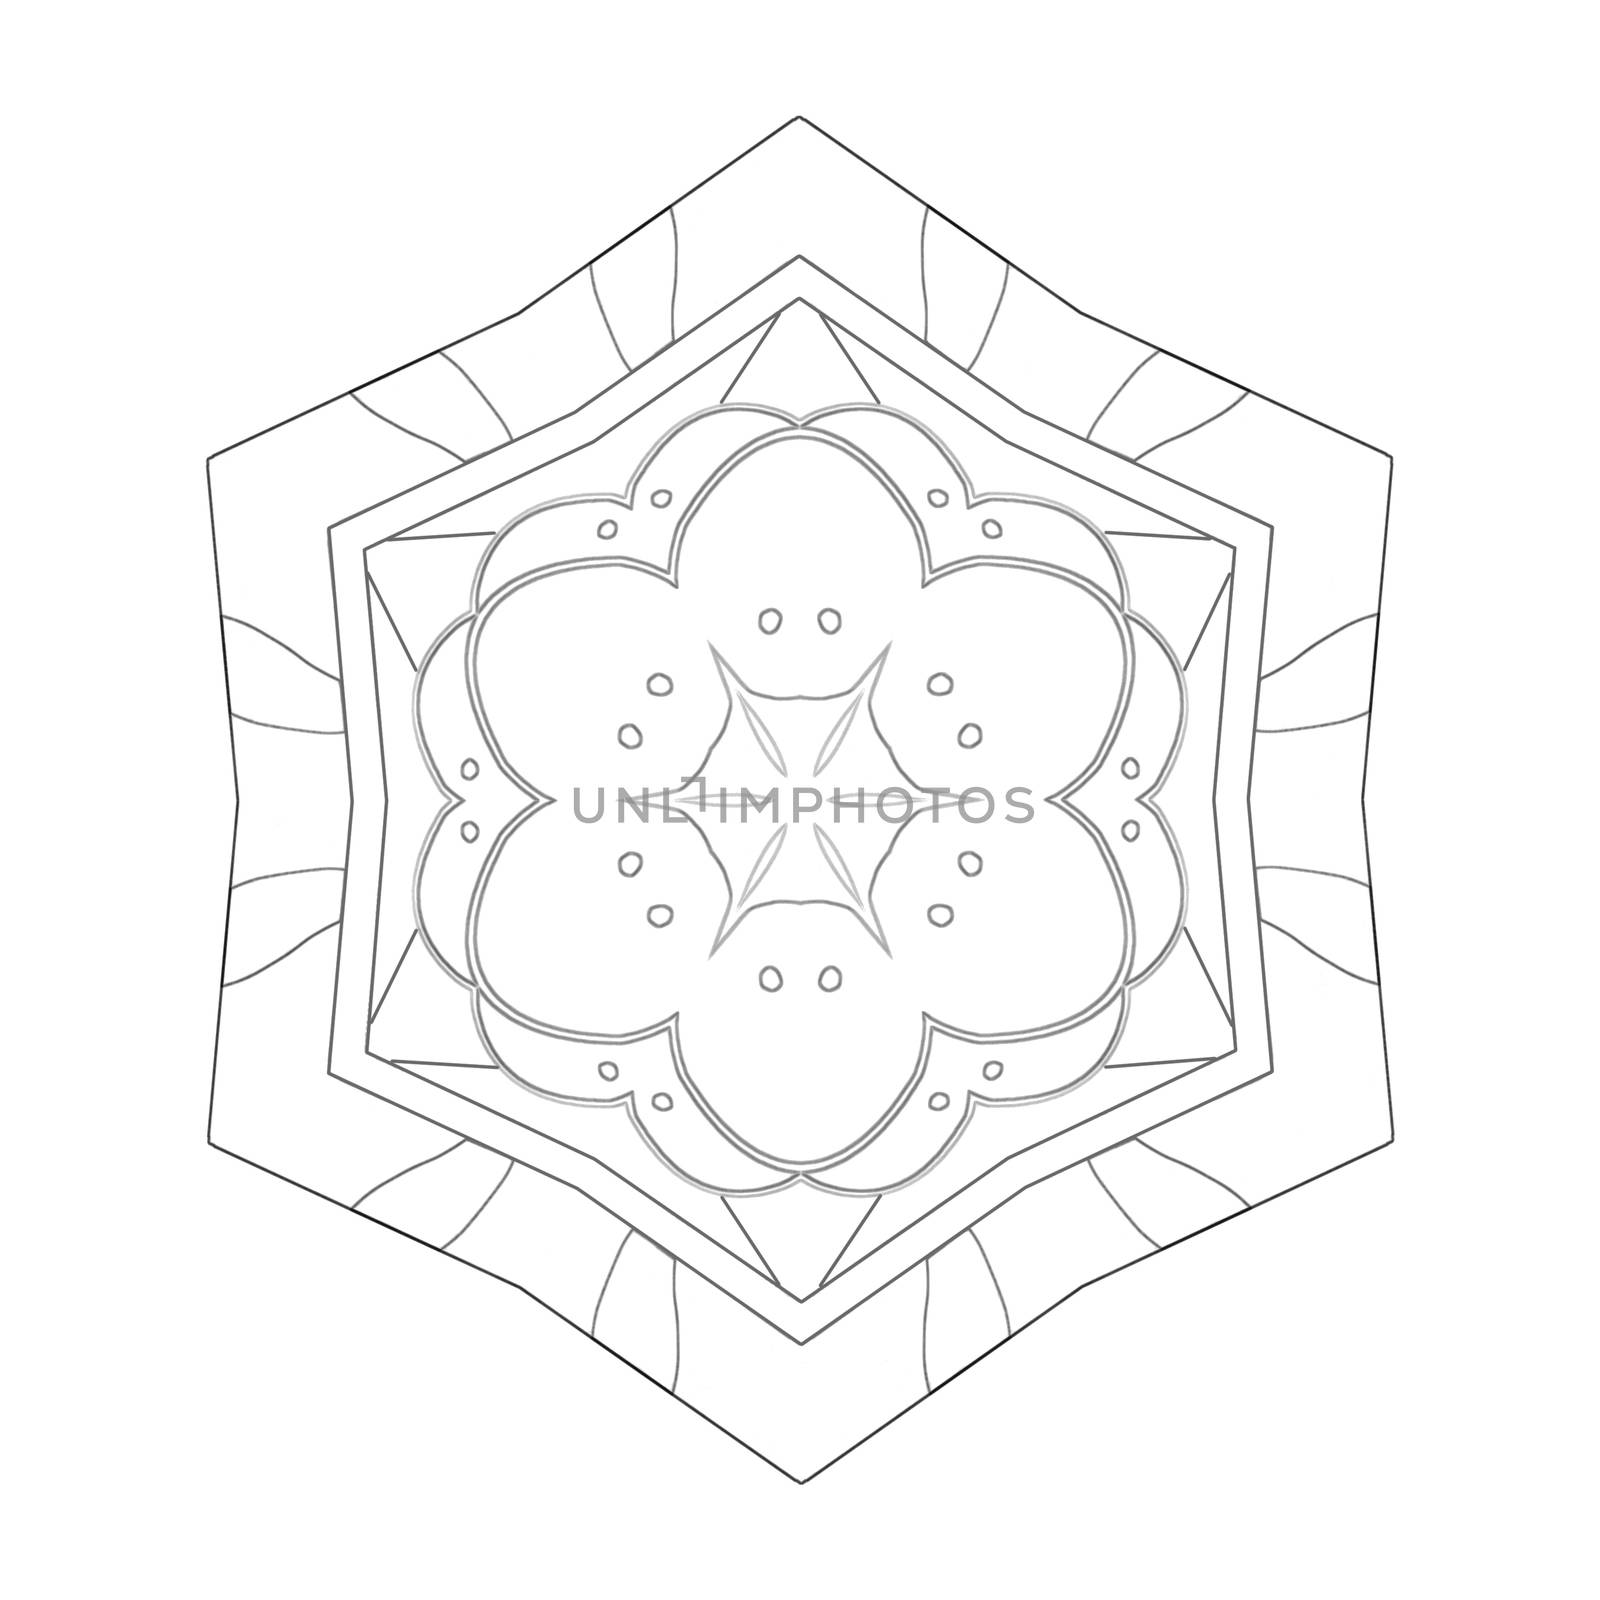 Illustration: Coloring Book Series: Geometric Flower Shape. Soft line. Print it and bring it to Life with Color! Fantastic Outline / Sketch / Line Art Design.